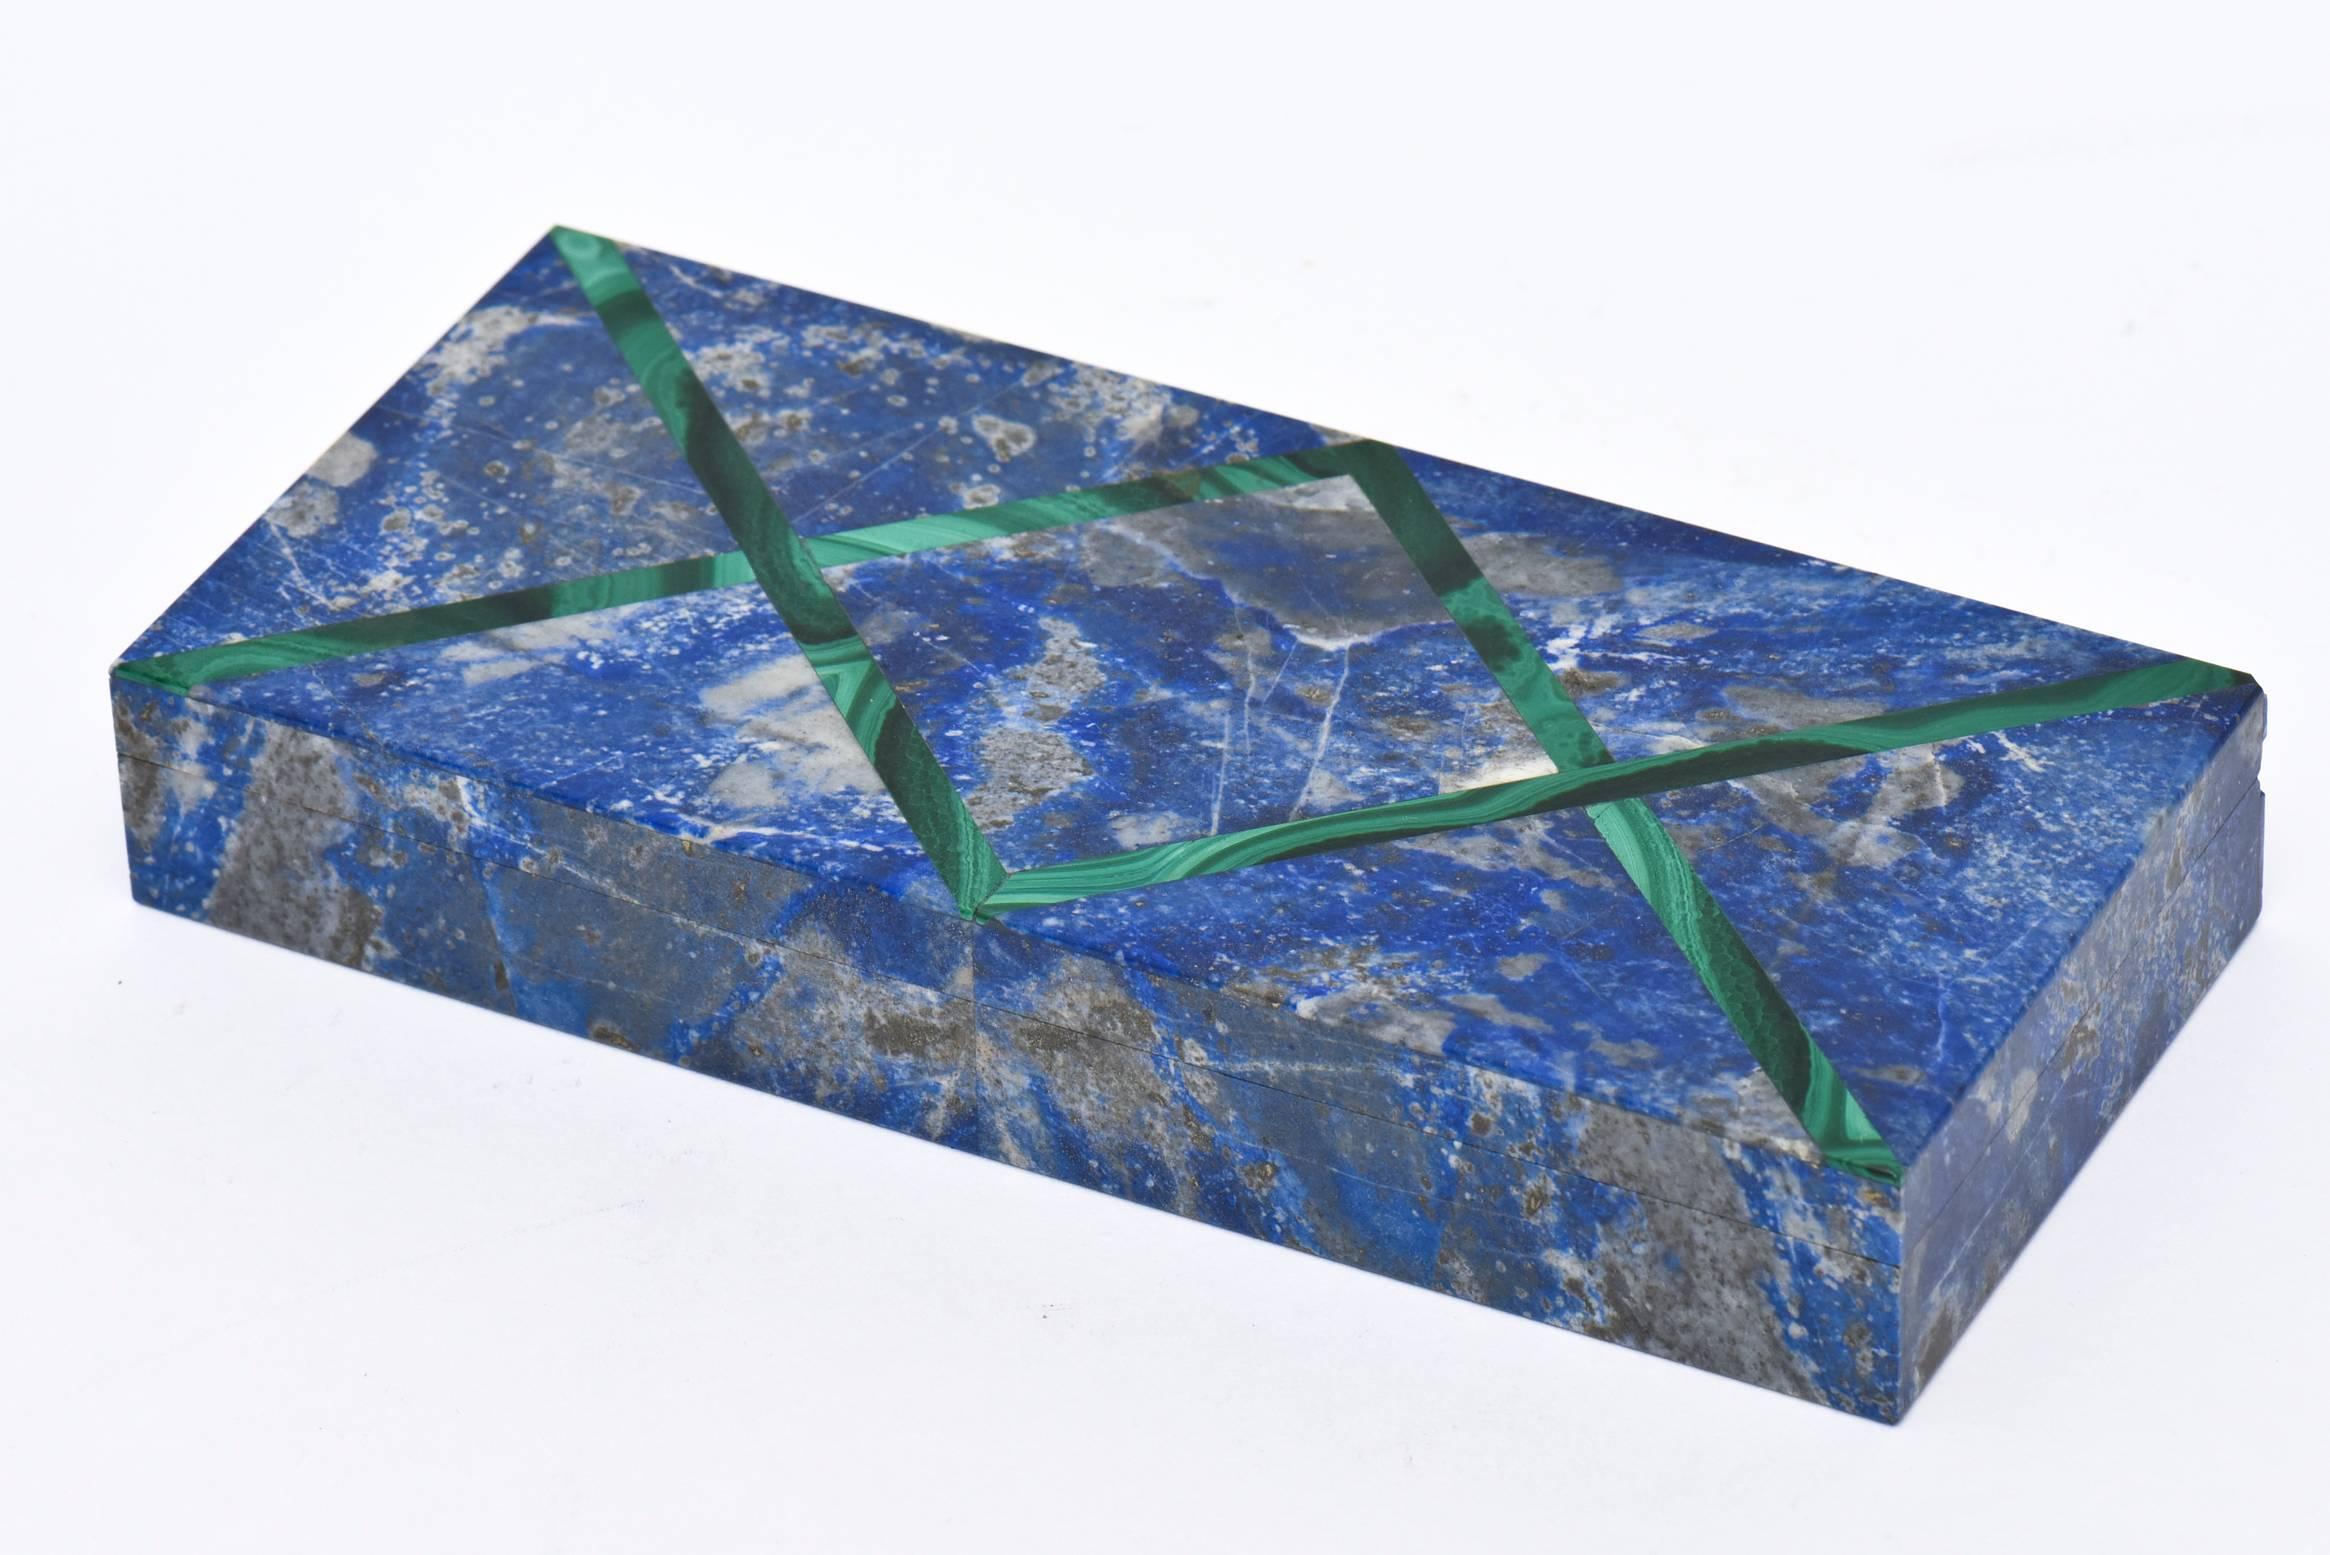 This gorgeous and unusual European hinged vintage box that is continental is a gorgeous combination of lapis lazuli and malachite X-formed diamond pattern. This is a very fine box and most unusual. This would be an elegant addition on a desk or